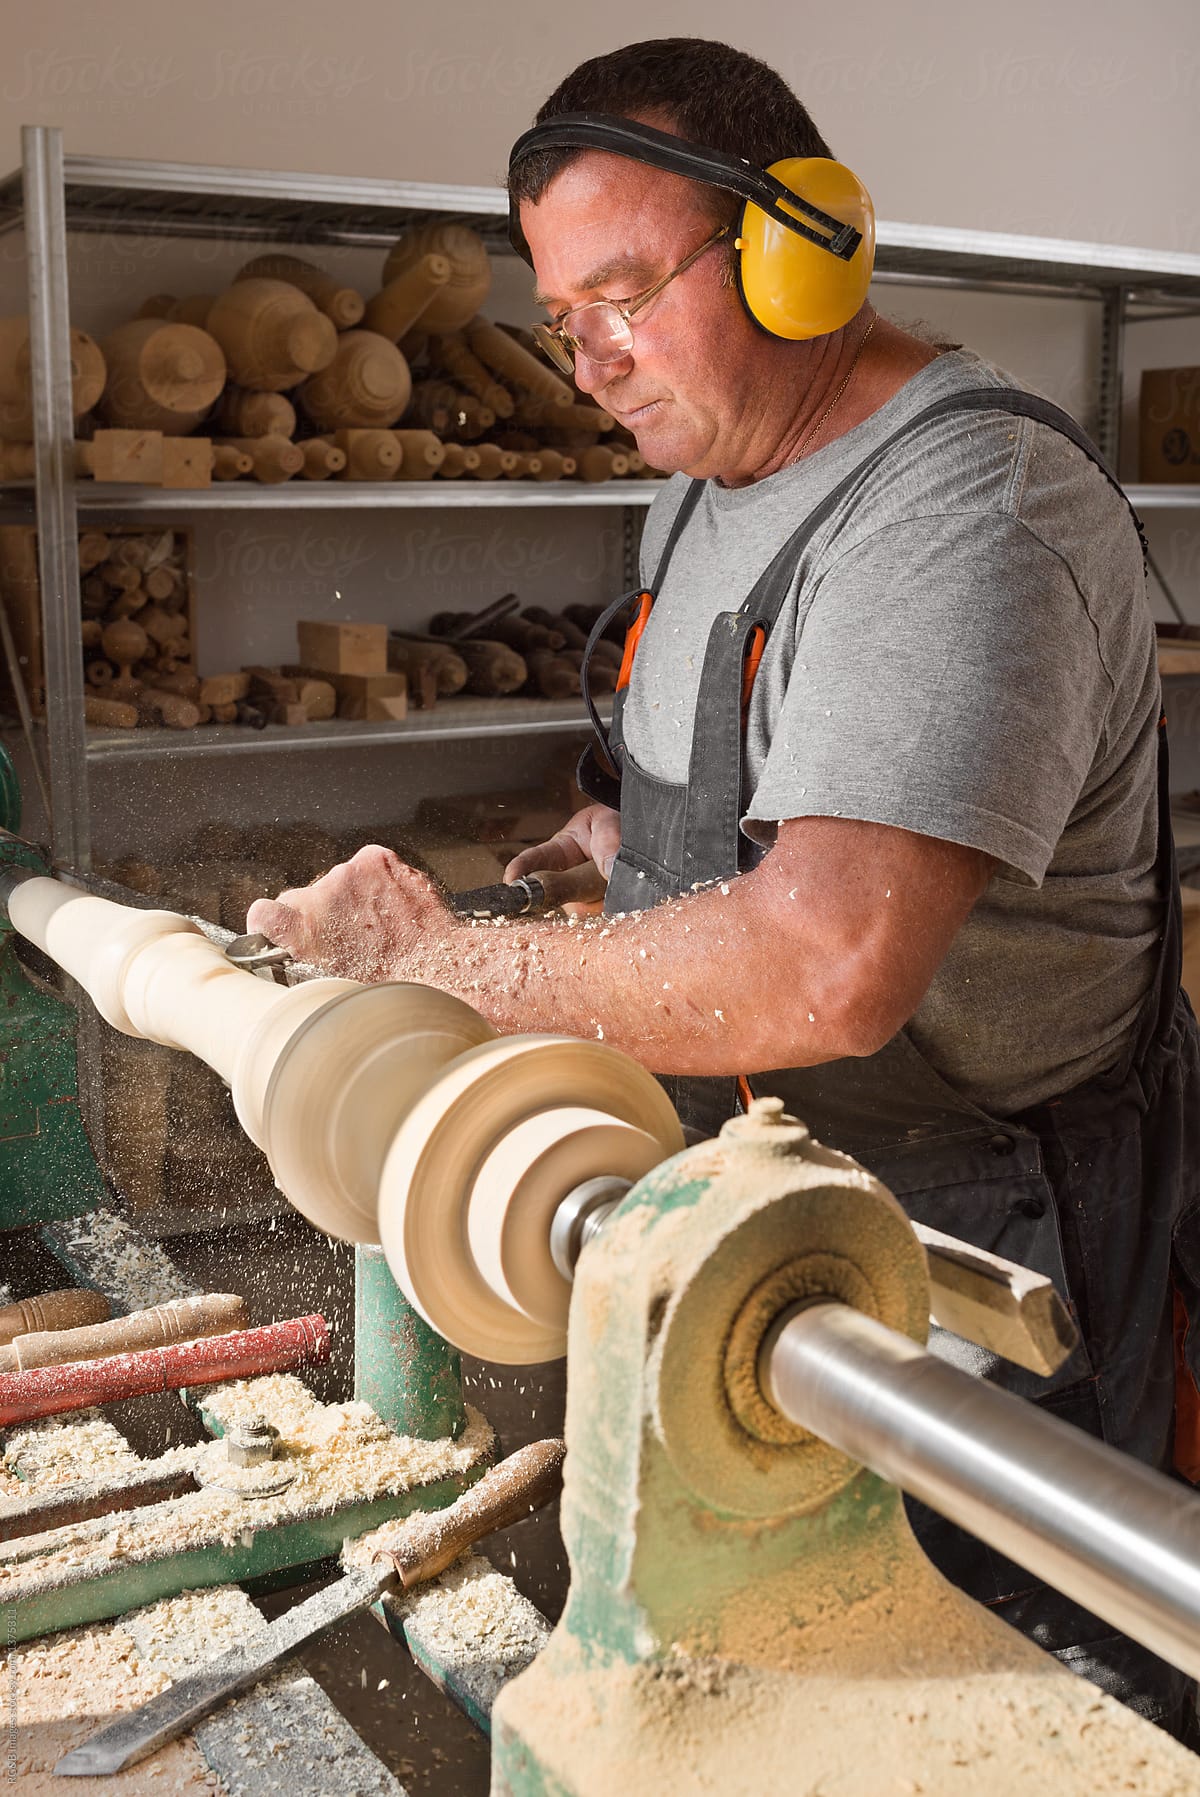 Man working on carpentry lathe in his workshop